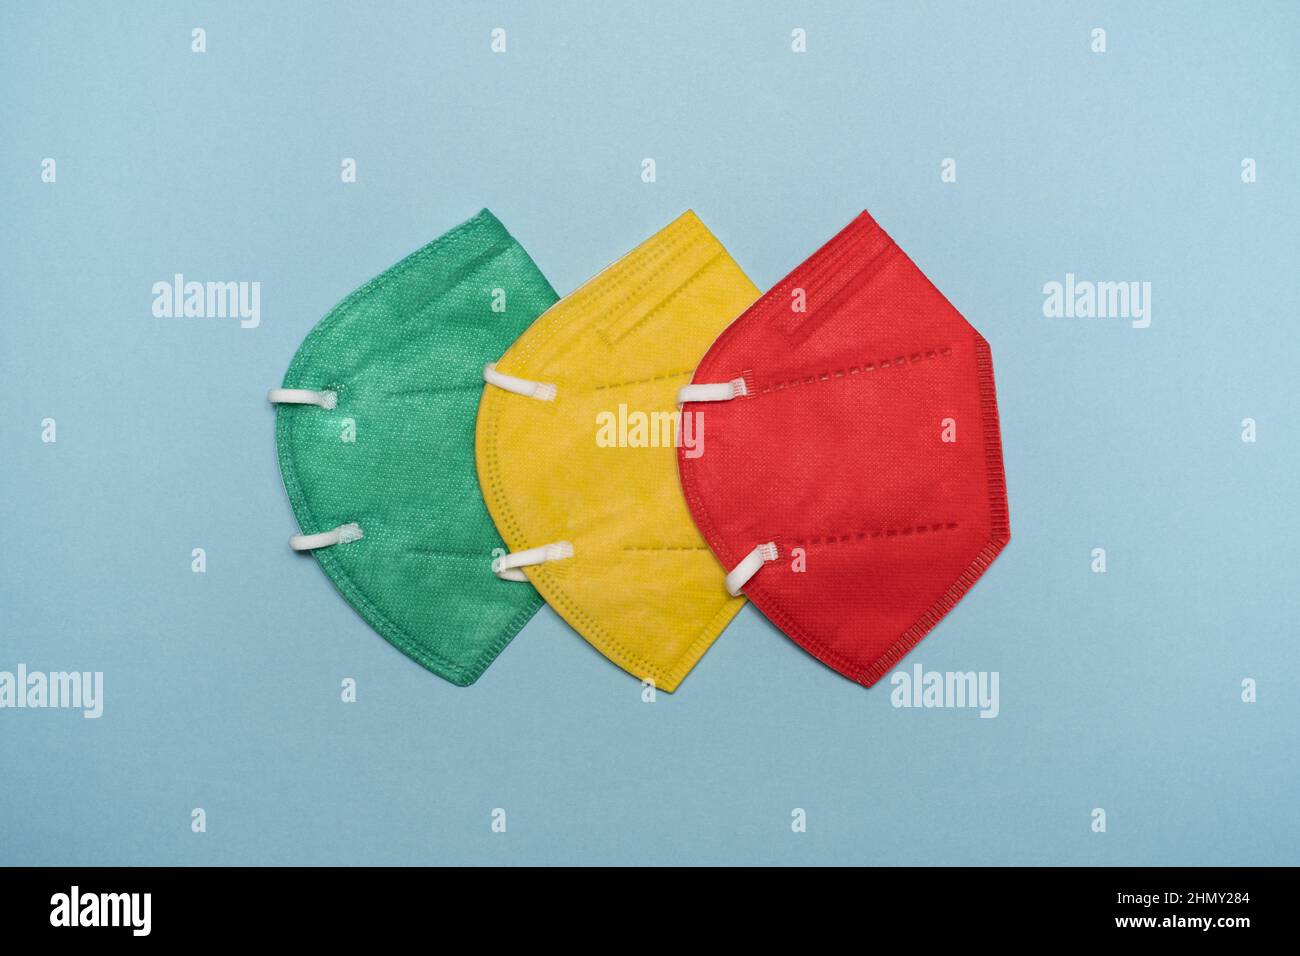 The Concept of Traffic Light System shows the phase of the pandemic Covid lockdown. Red, yellow and green respirator protective masks on blue bg. Stock Photo